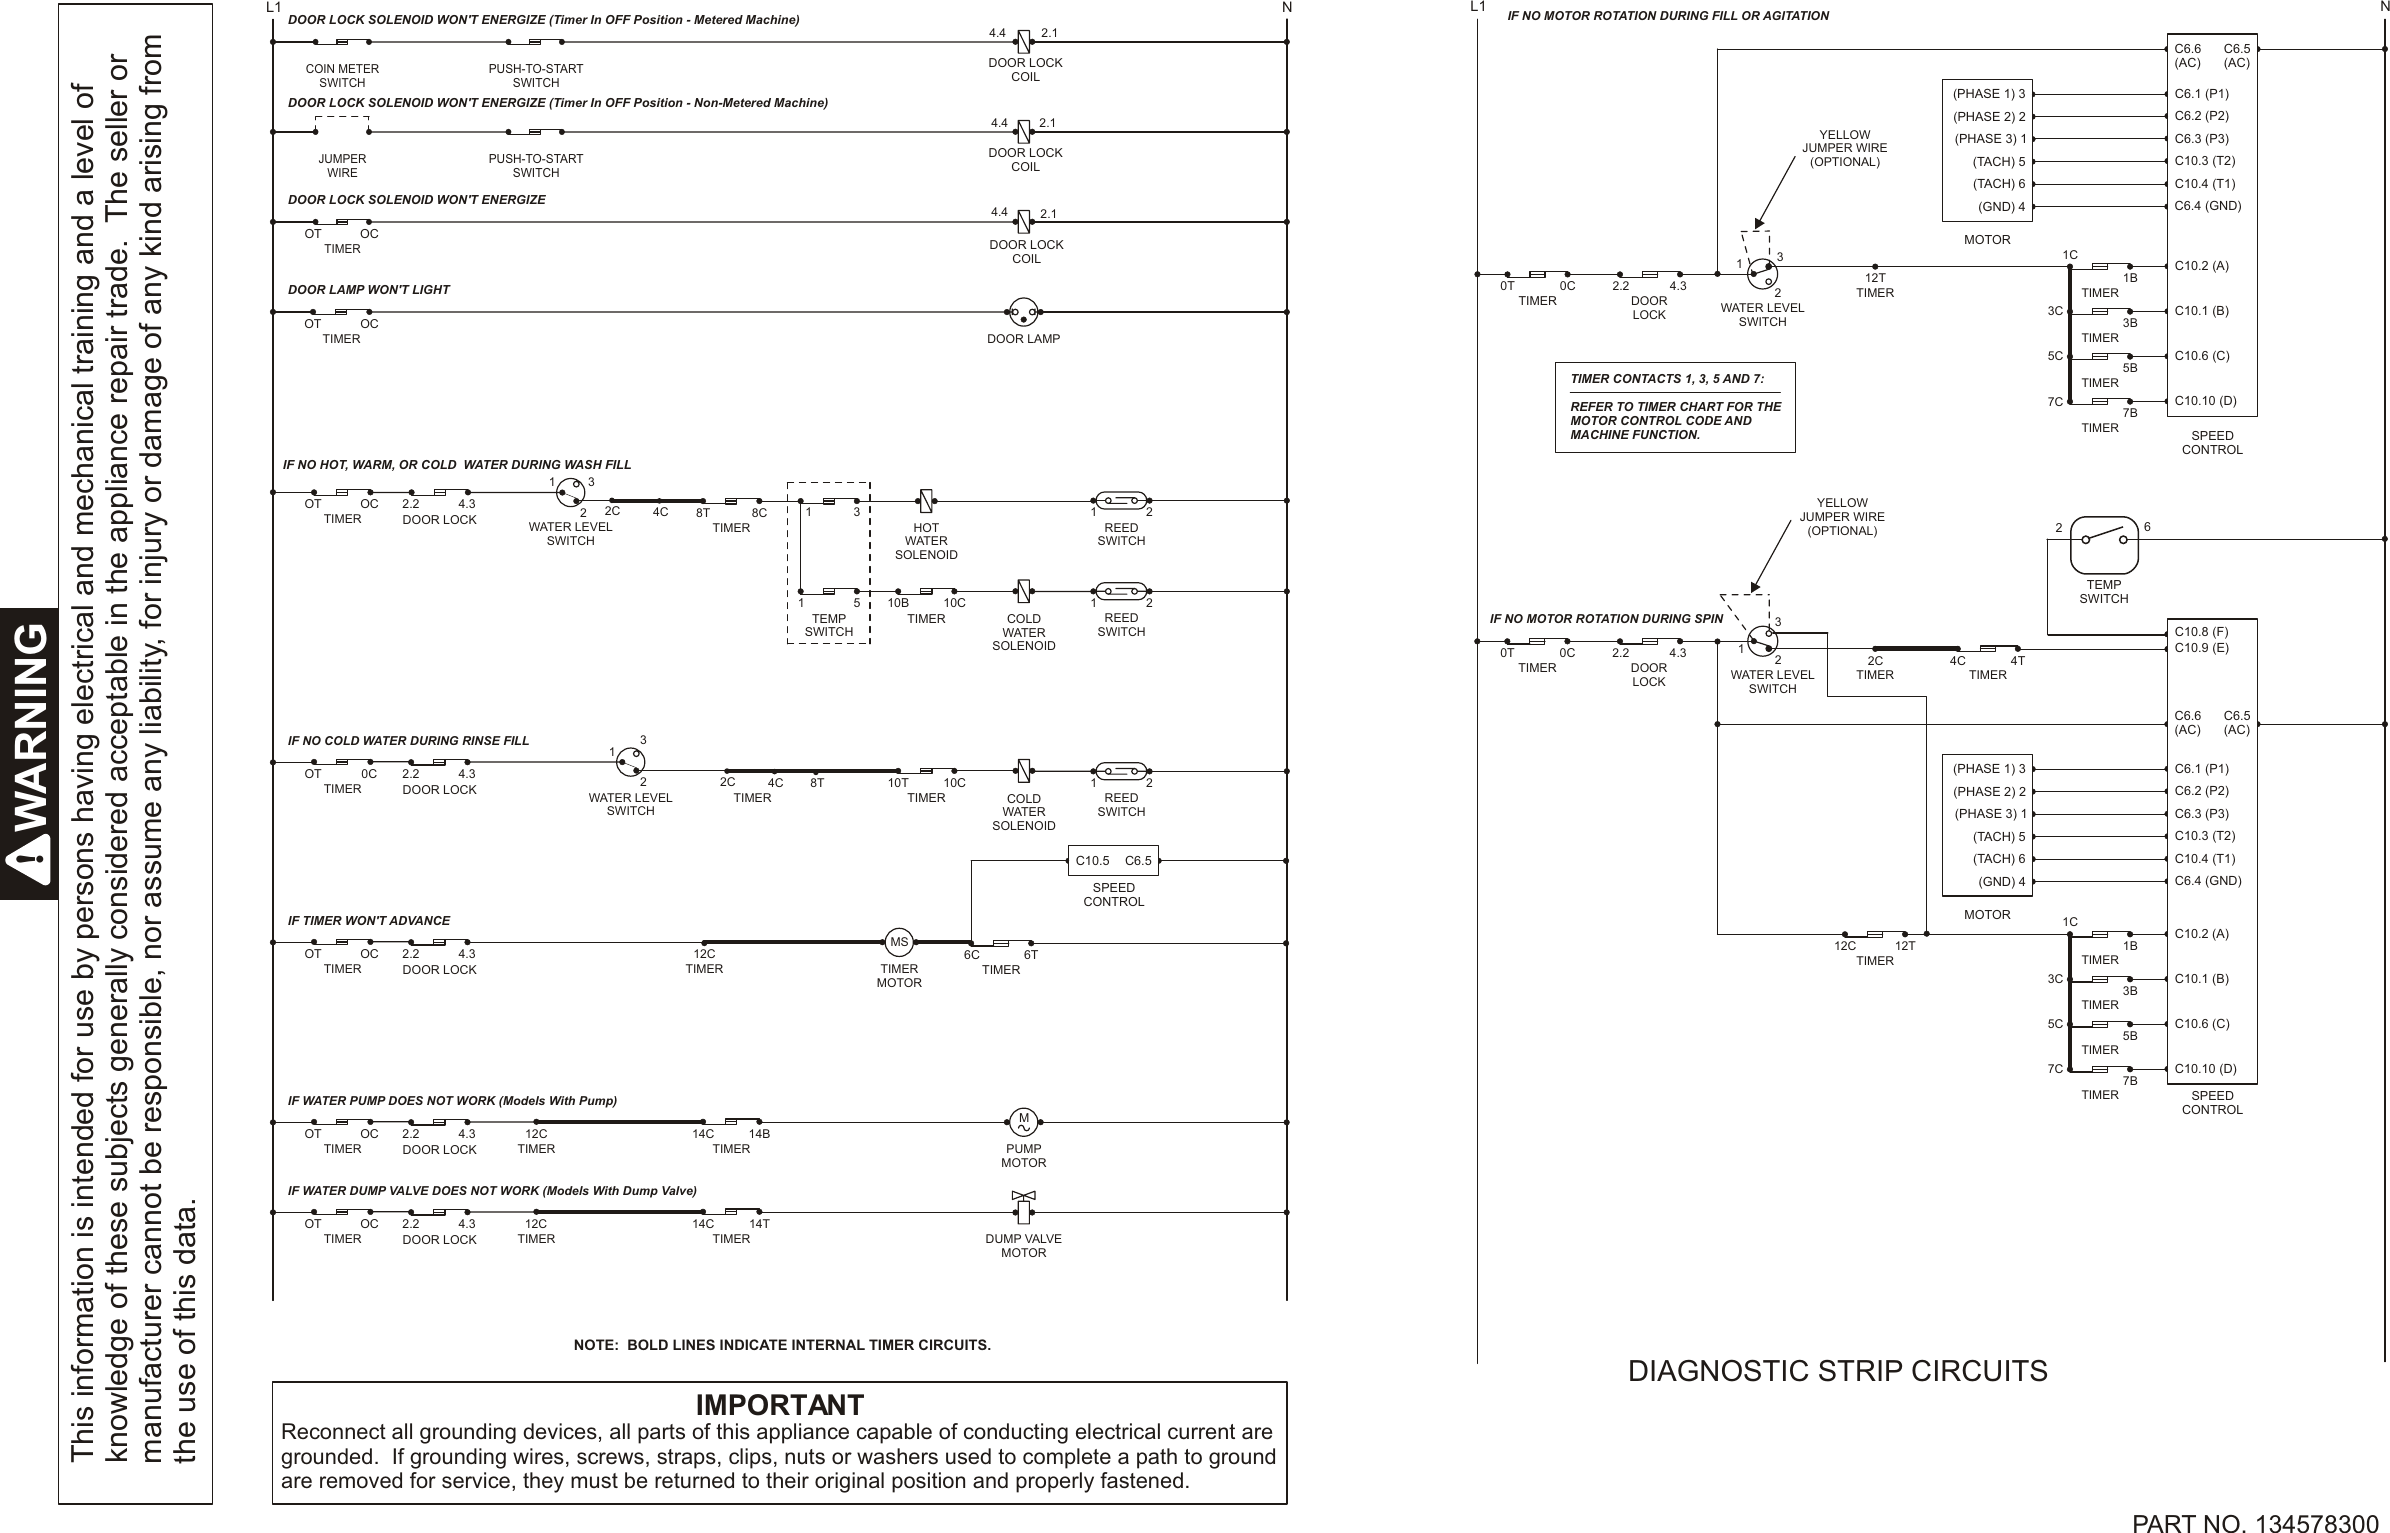 Page 4 of 4 - Kenmore Front Load Washer Wiring Sheet 417.24182301